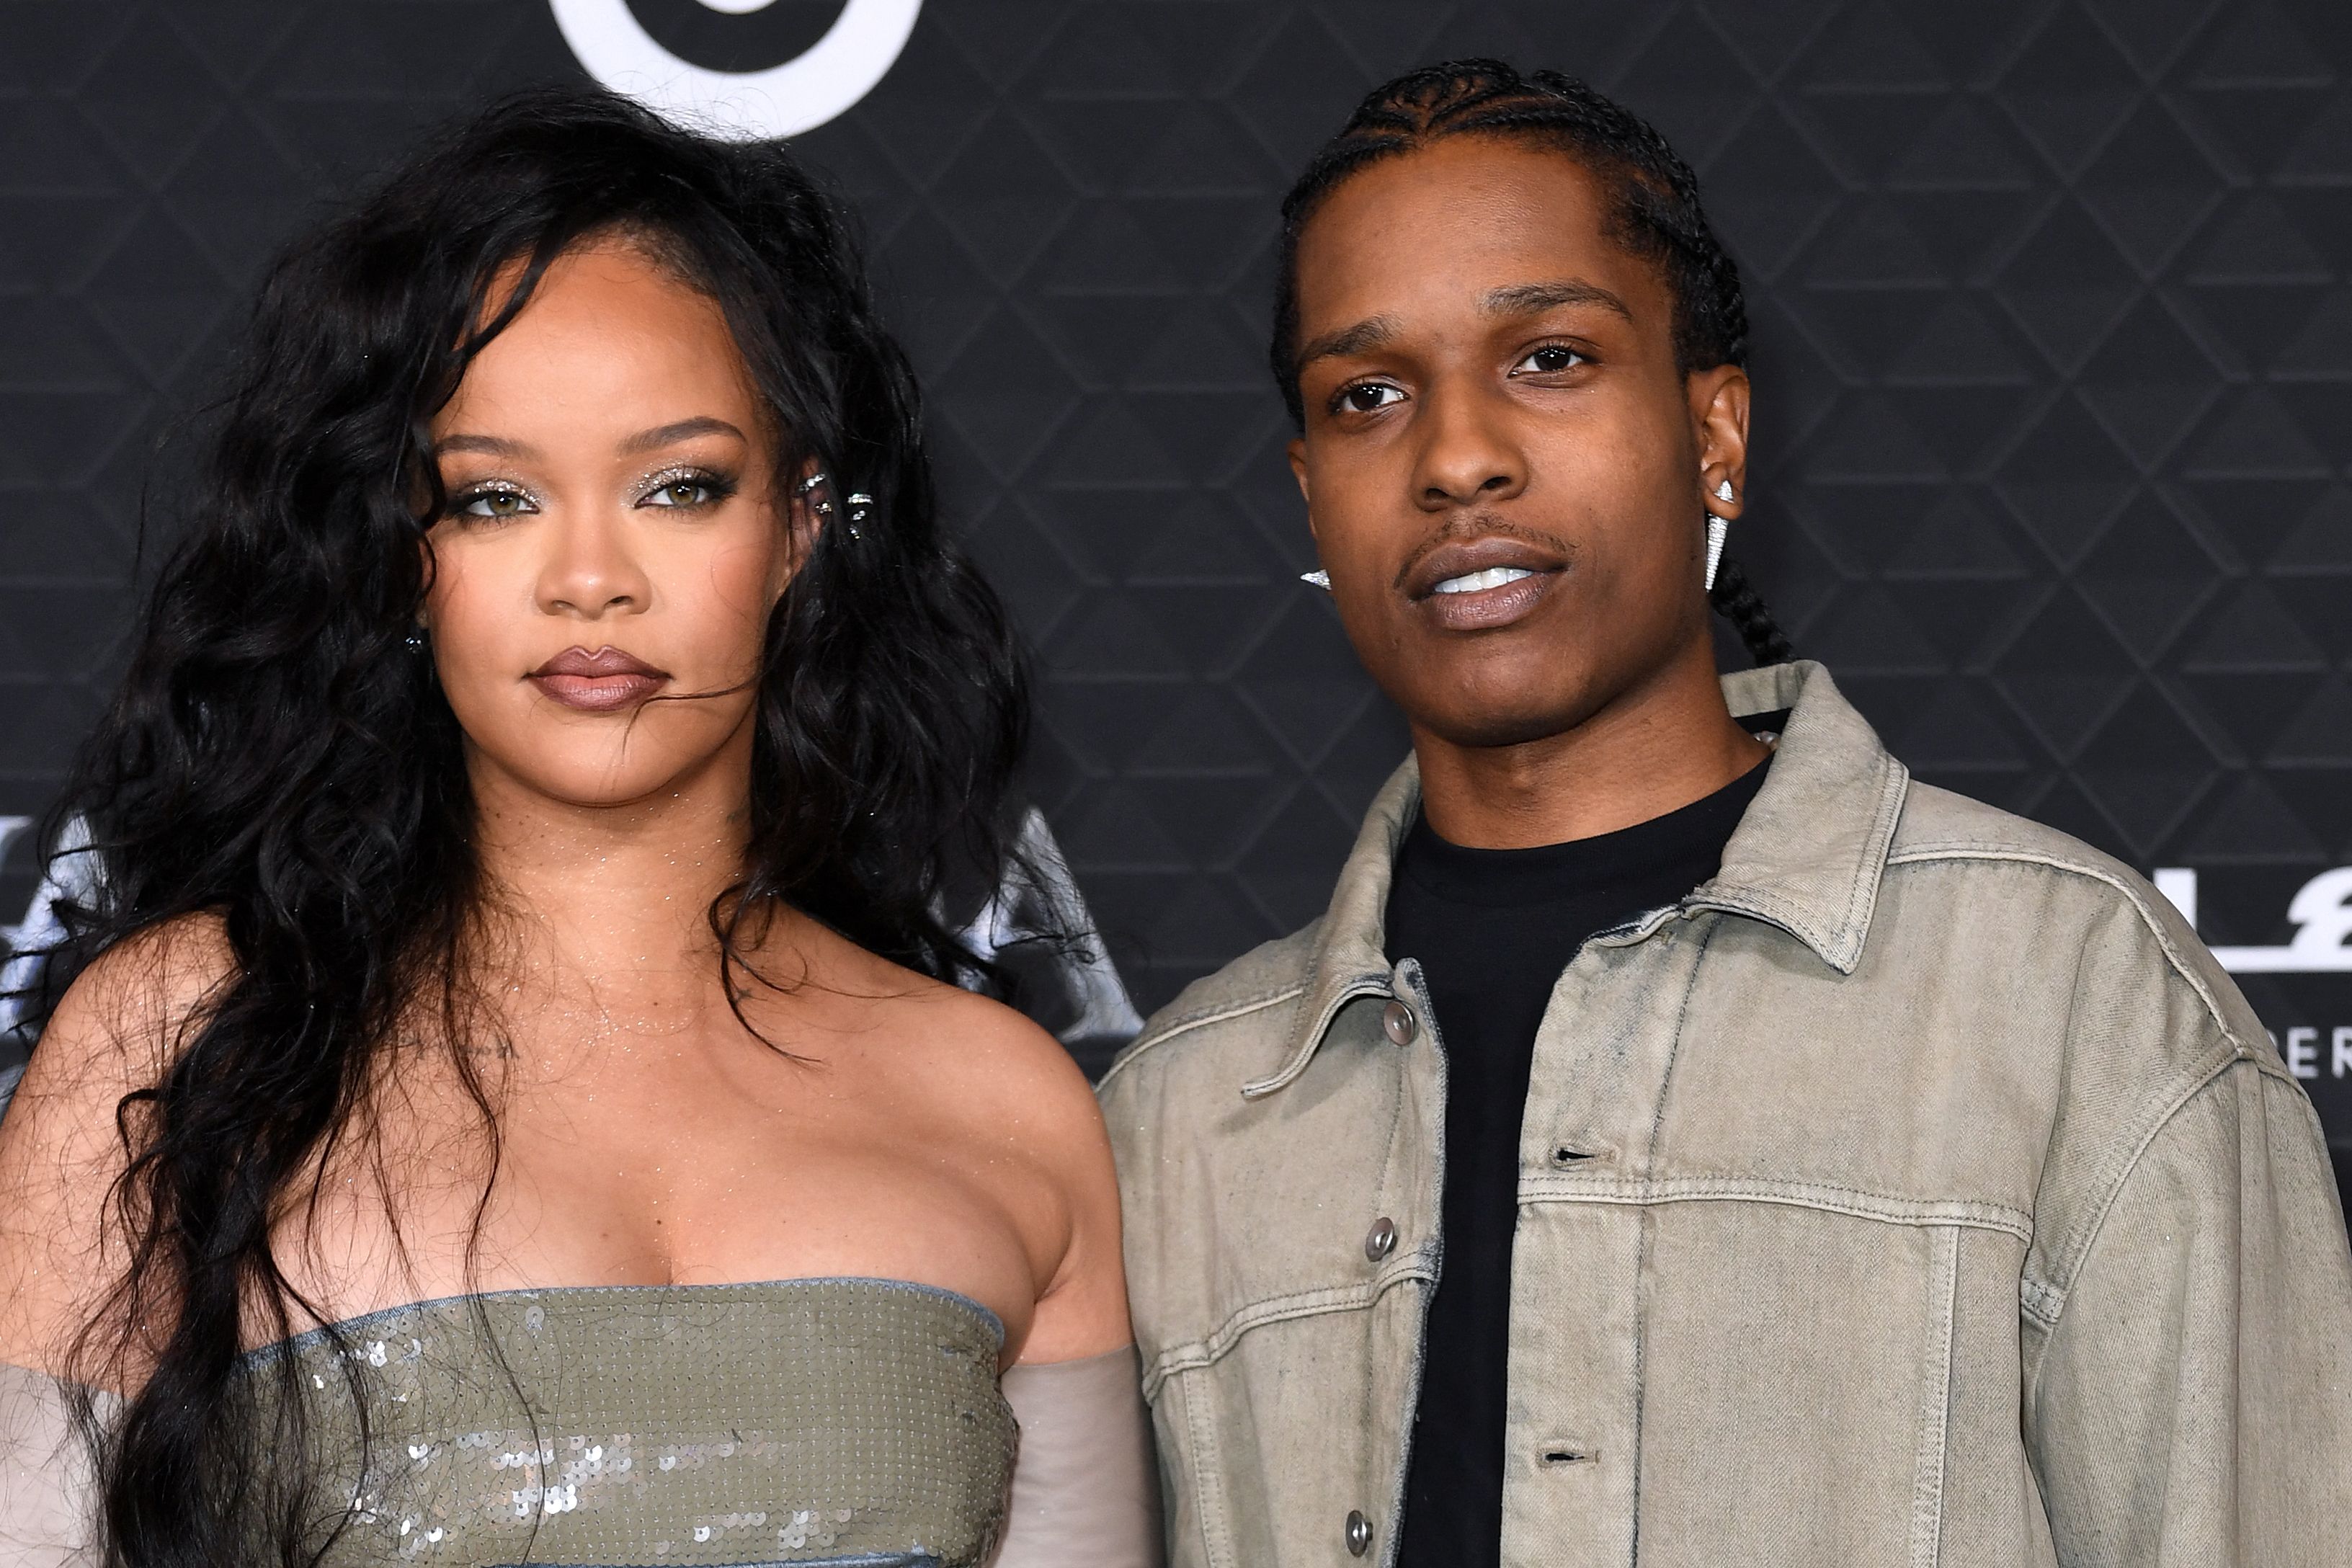 Rihanna and A$AP Rocky in Hollywood, California, on October 26, 2022. | Source: Getty Images